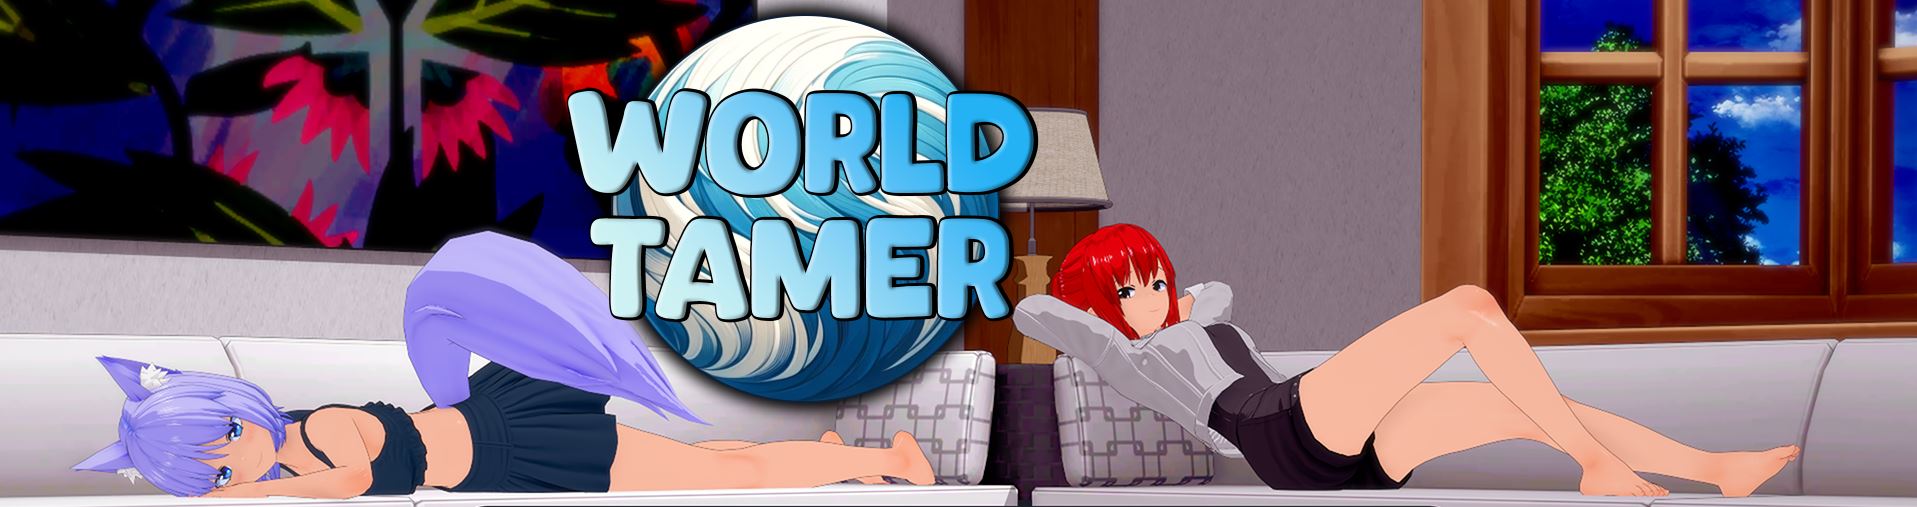 World Tamer Adult Game Android Apk Download (9)